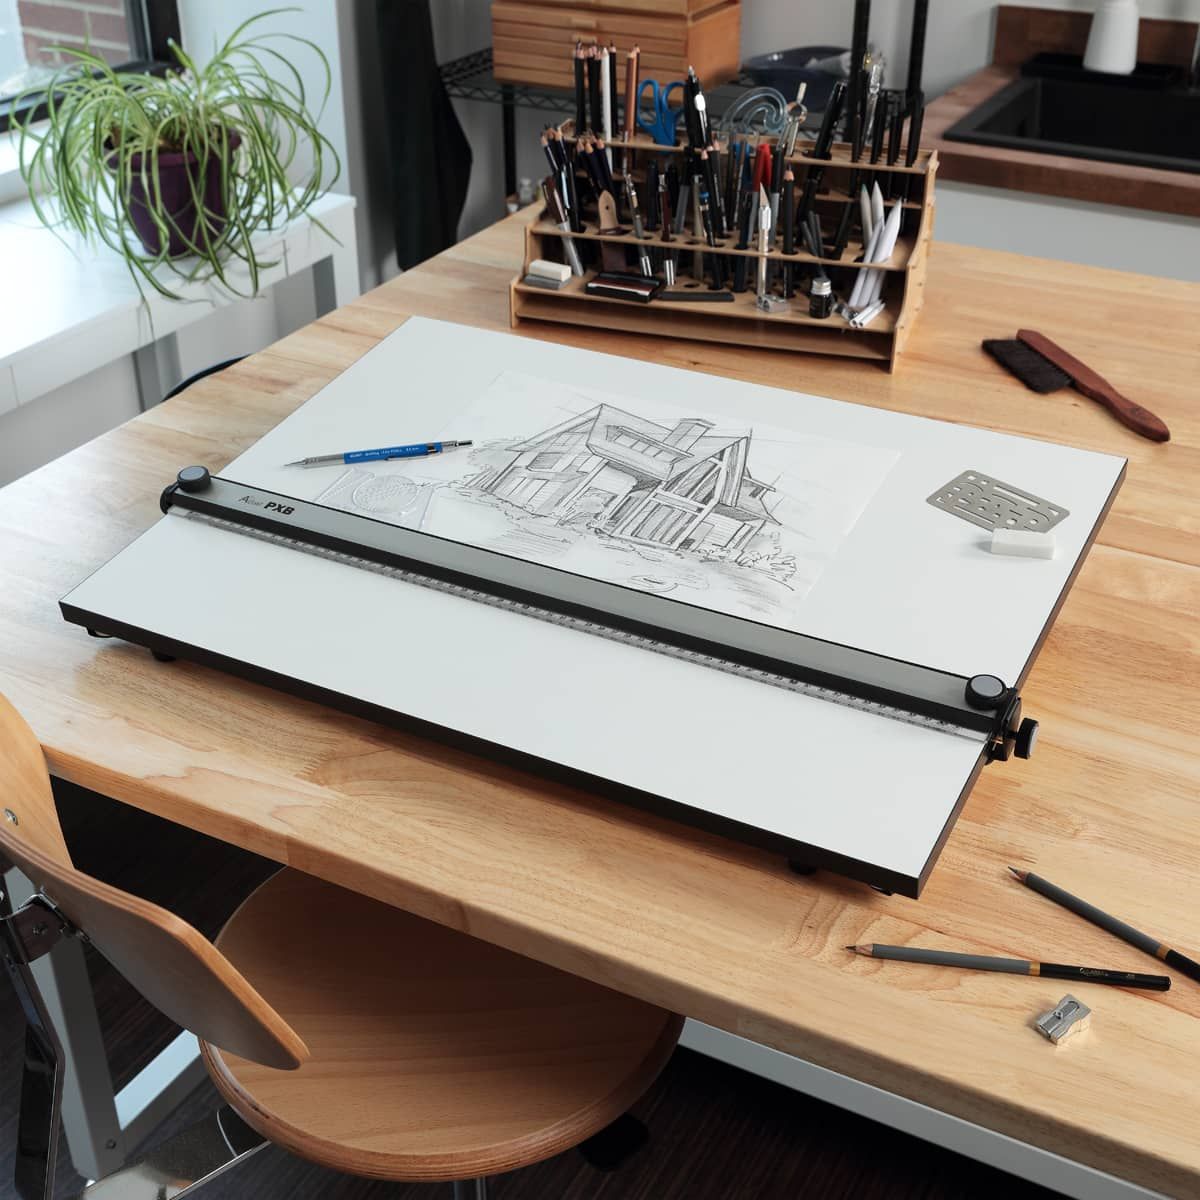 Fixed Angle PXB Drawing Board in use